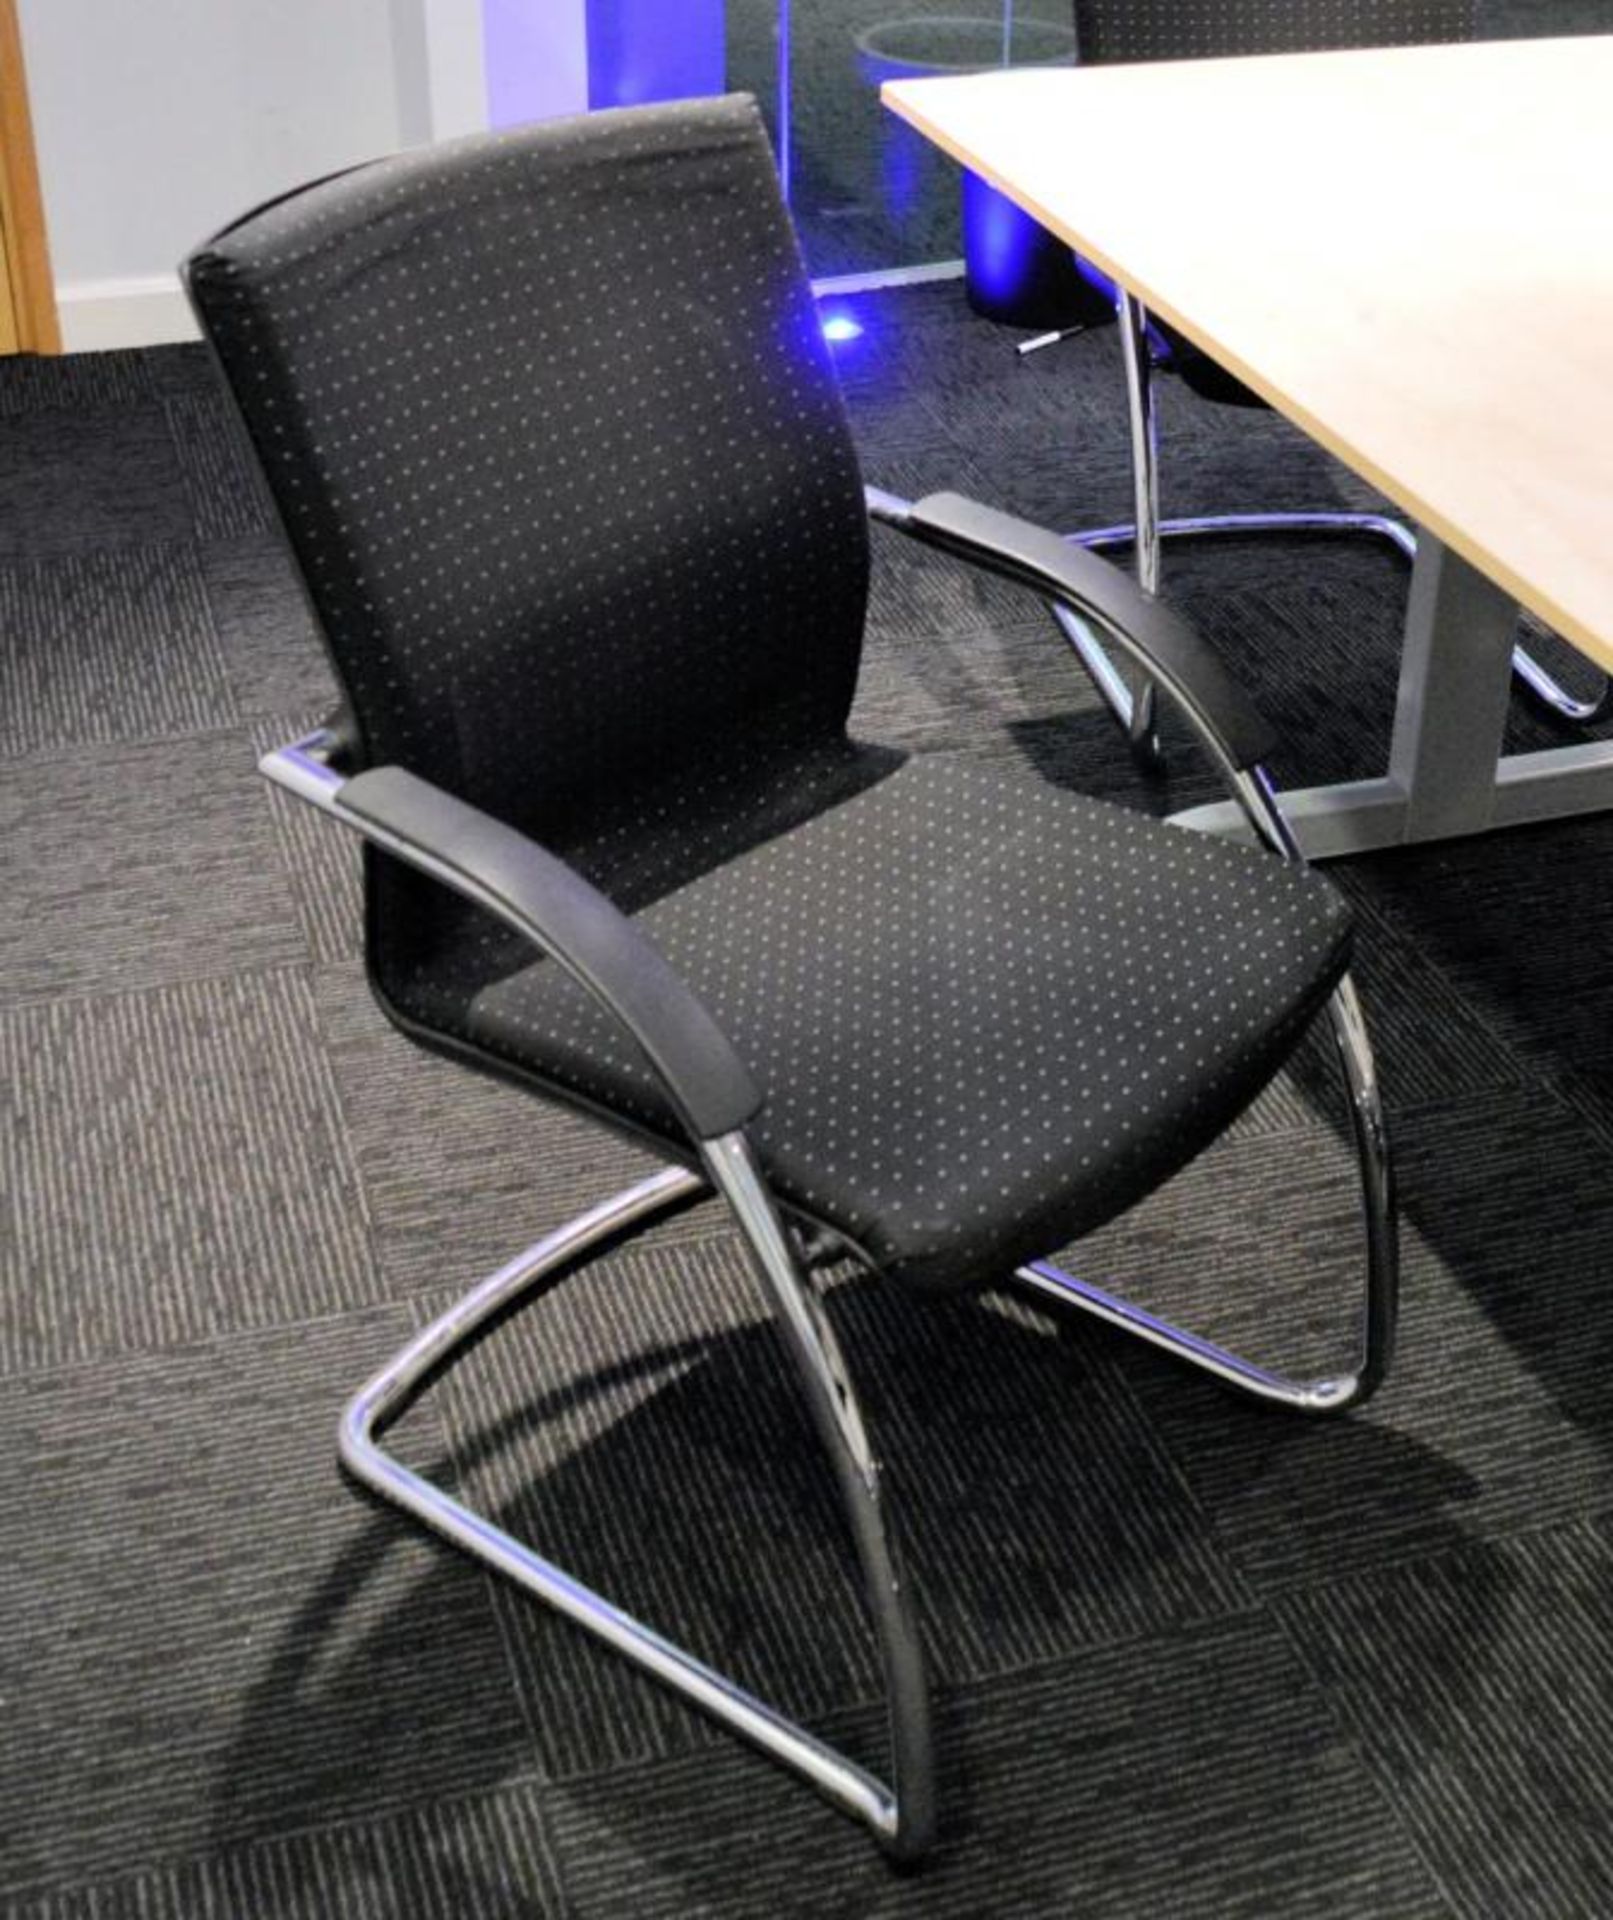 8 x Stackable Boardroom Meeting Chairs in Black With Chrome Stands and Arm Rests - Contemporary - Image 2 of 7